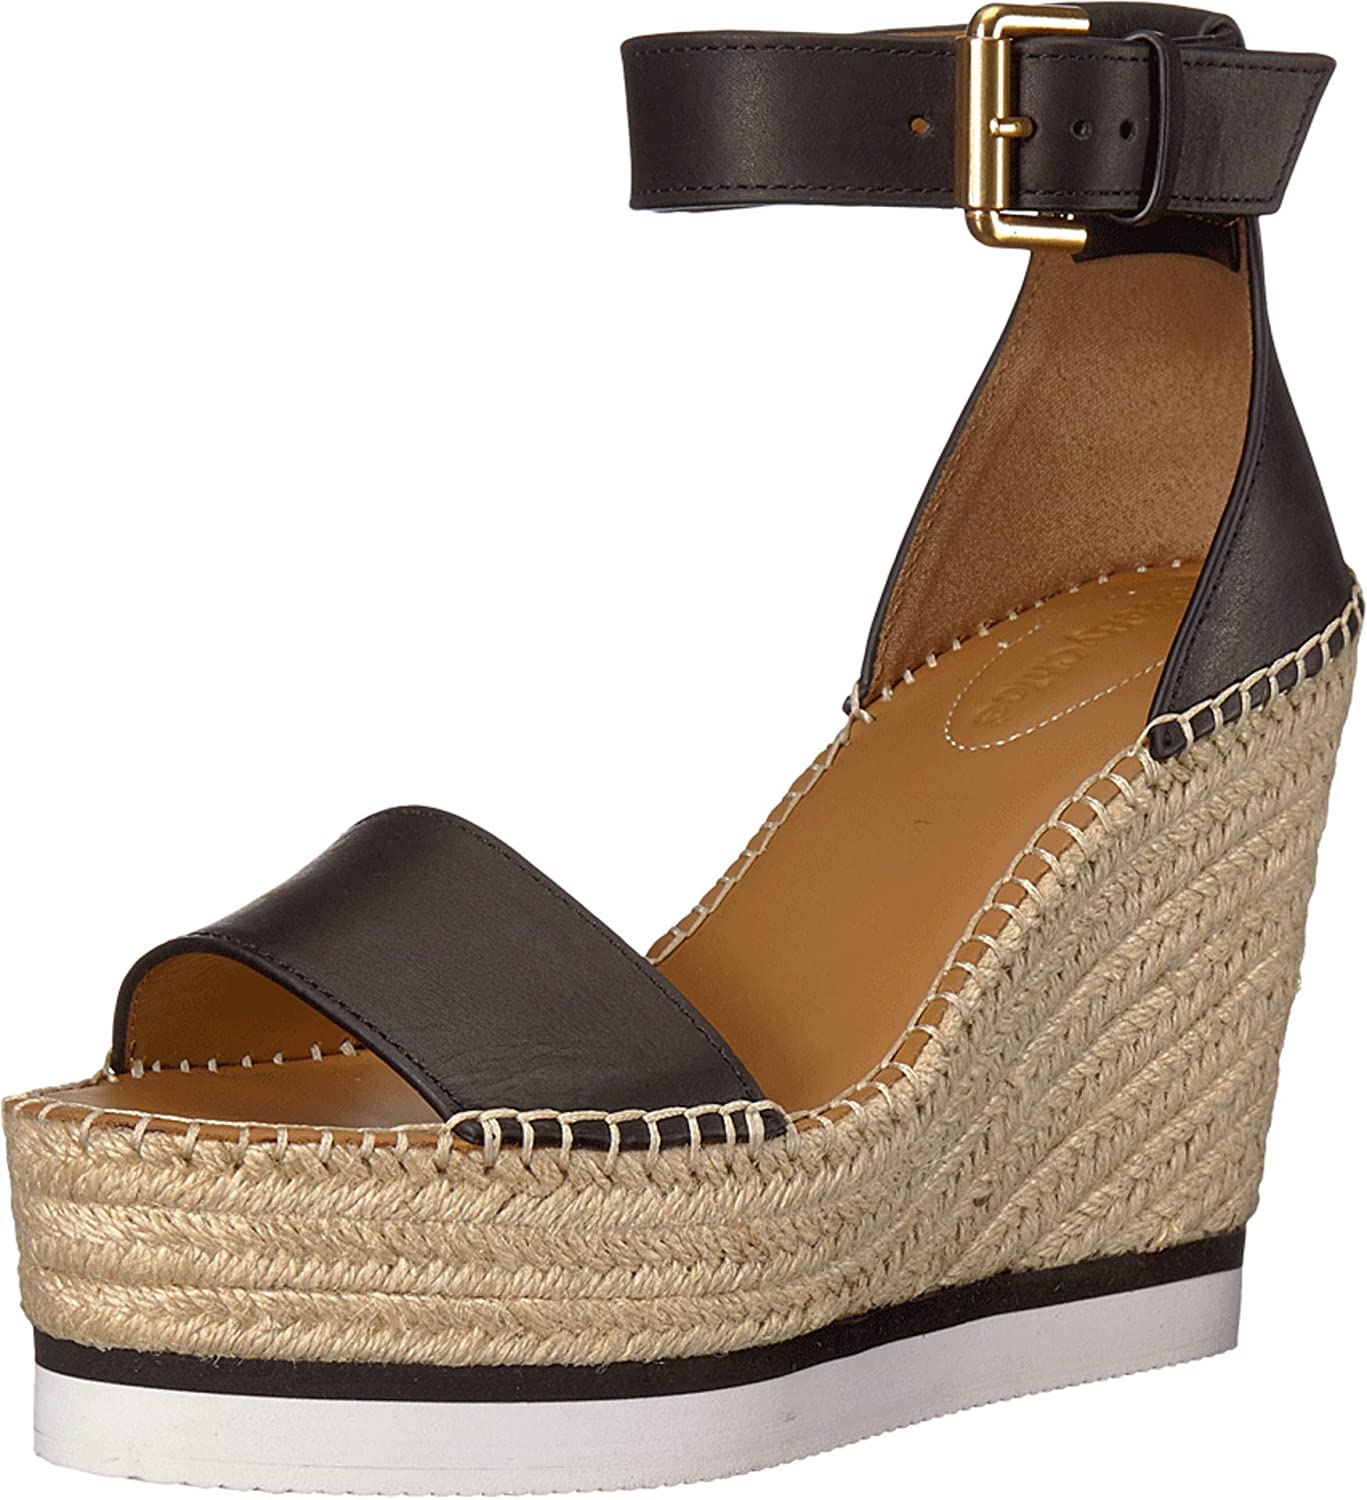 Shop See By Chloé See By Chloe Women's Wedge Heeled Glyn Black Leather Sandals Shoes